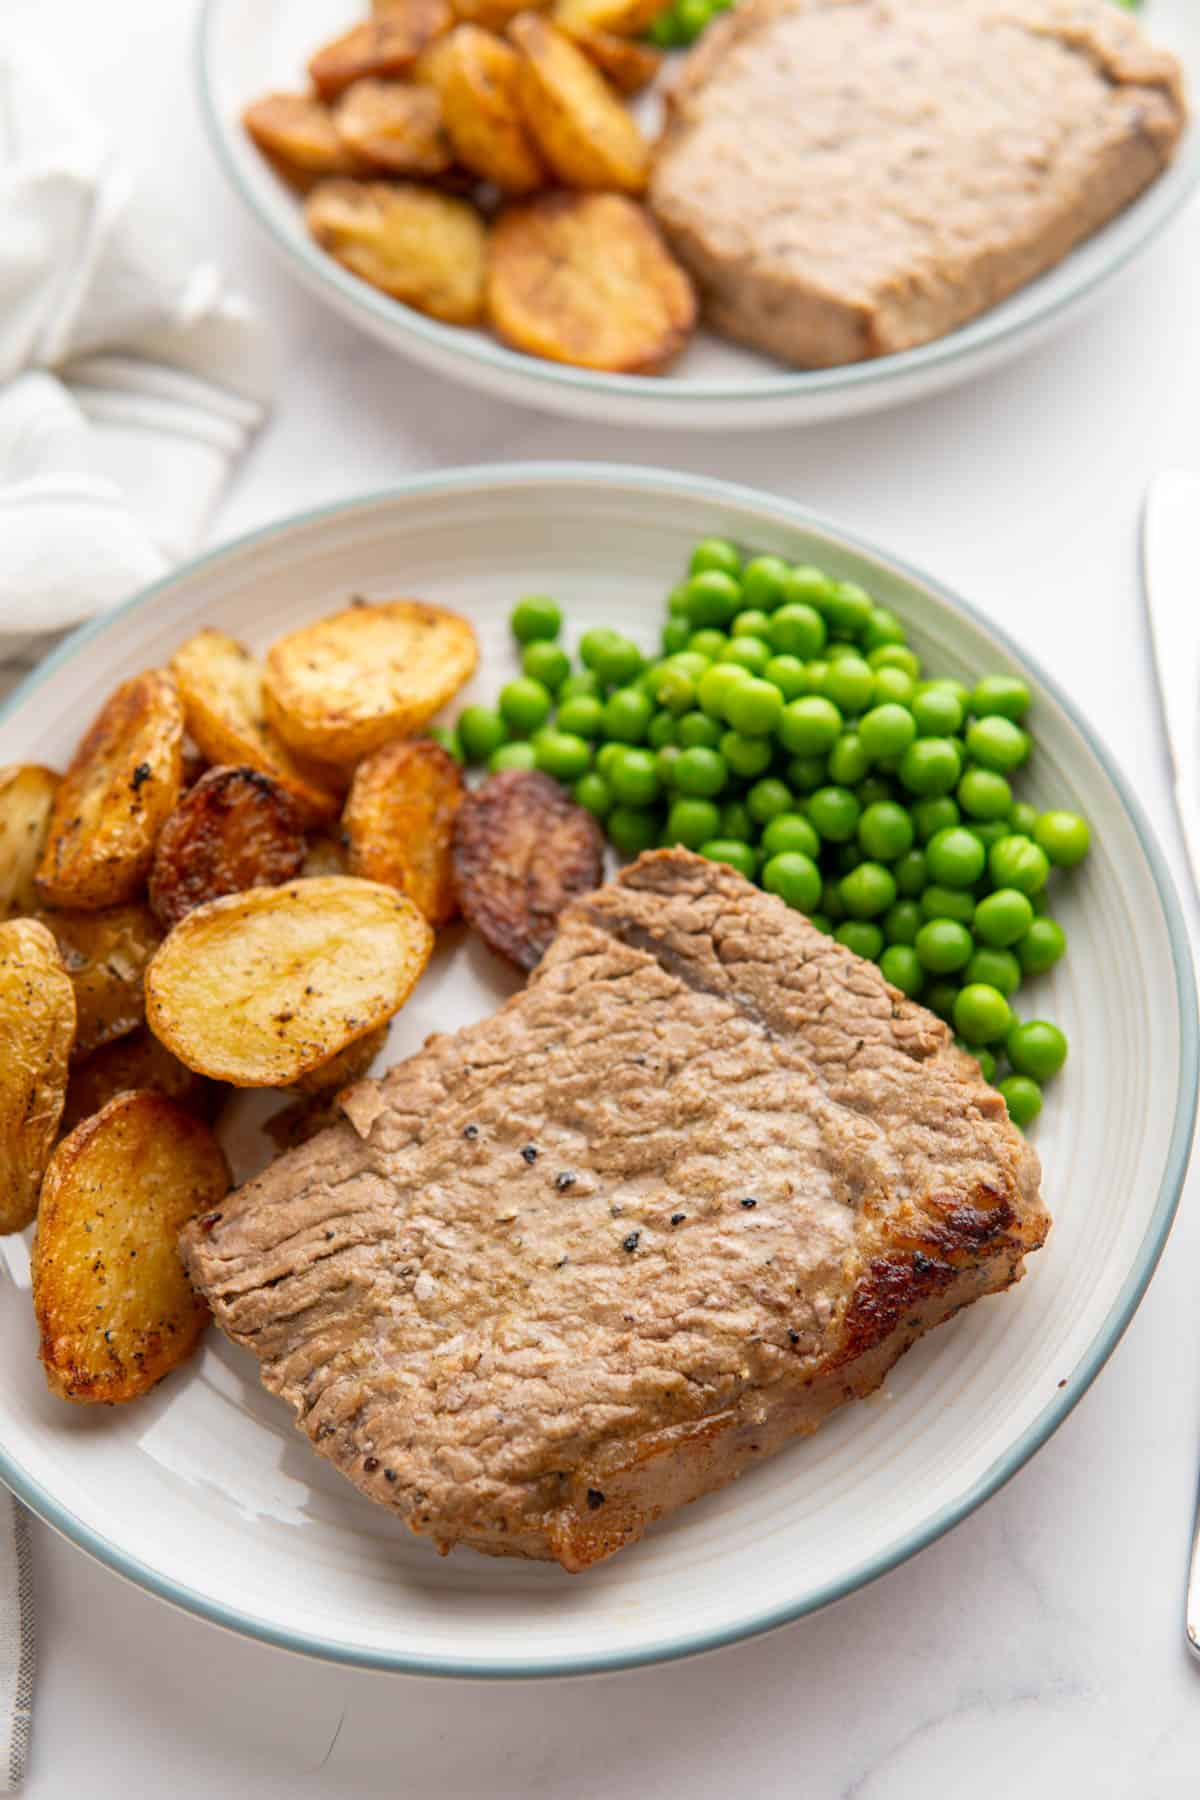 Marinated cube steak served on a plate with peas and roasted baby potatoes on a white background.